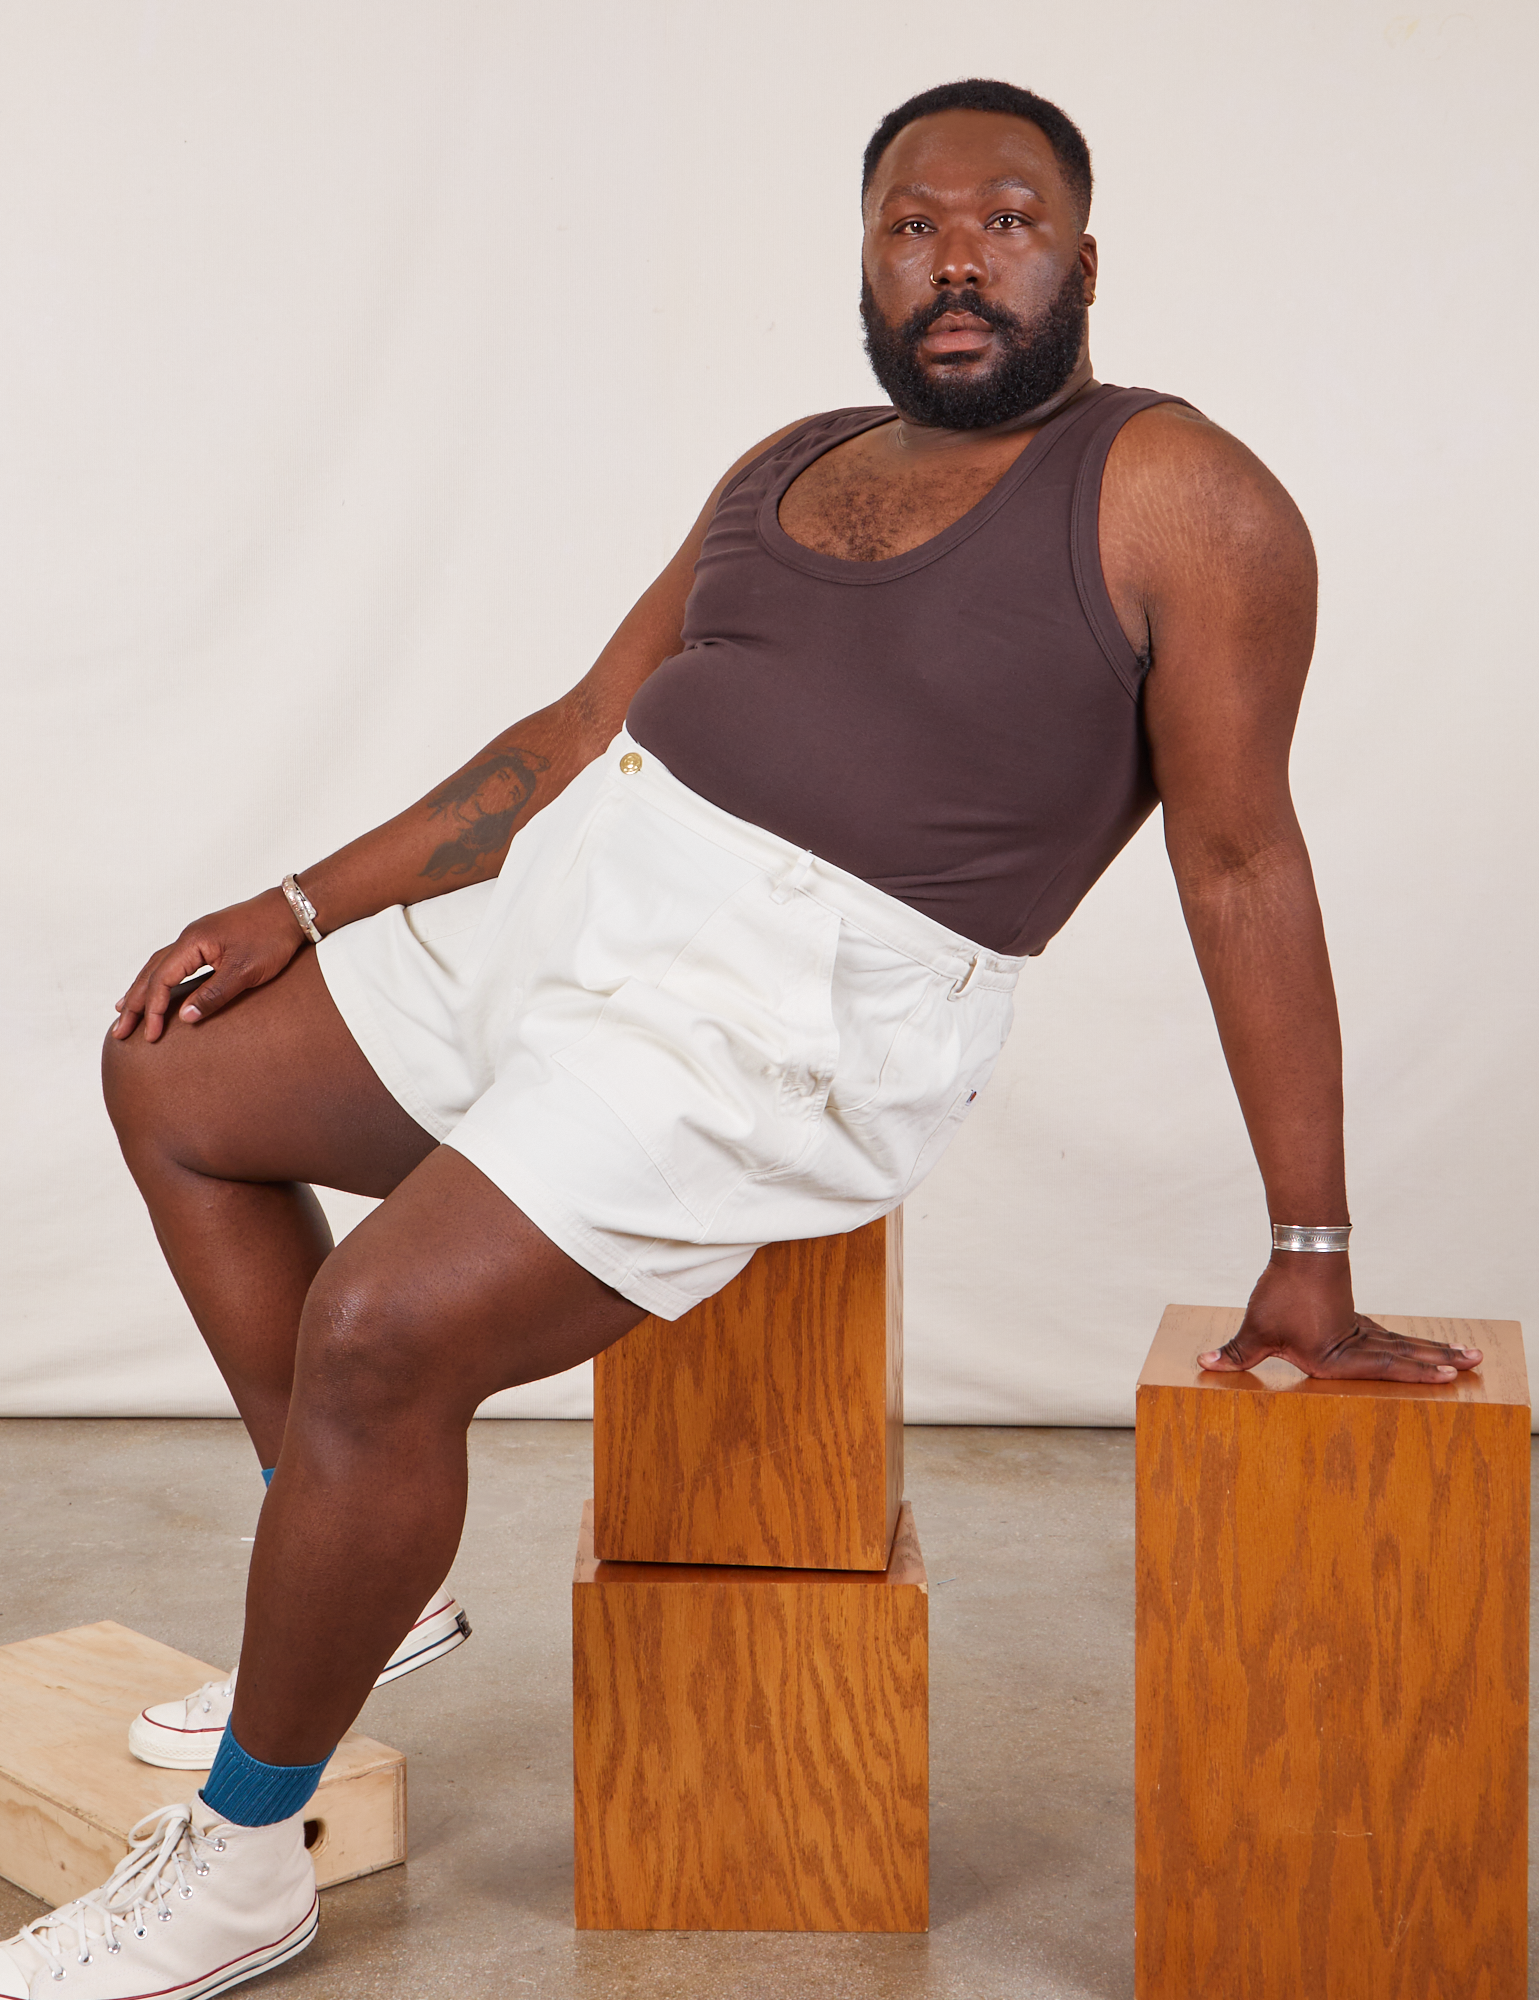 Elijah is wearing Classic Work Shorts in Vintage Tee Off-White and espresso brown Tank Top